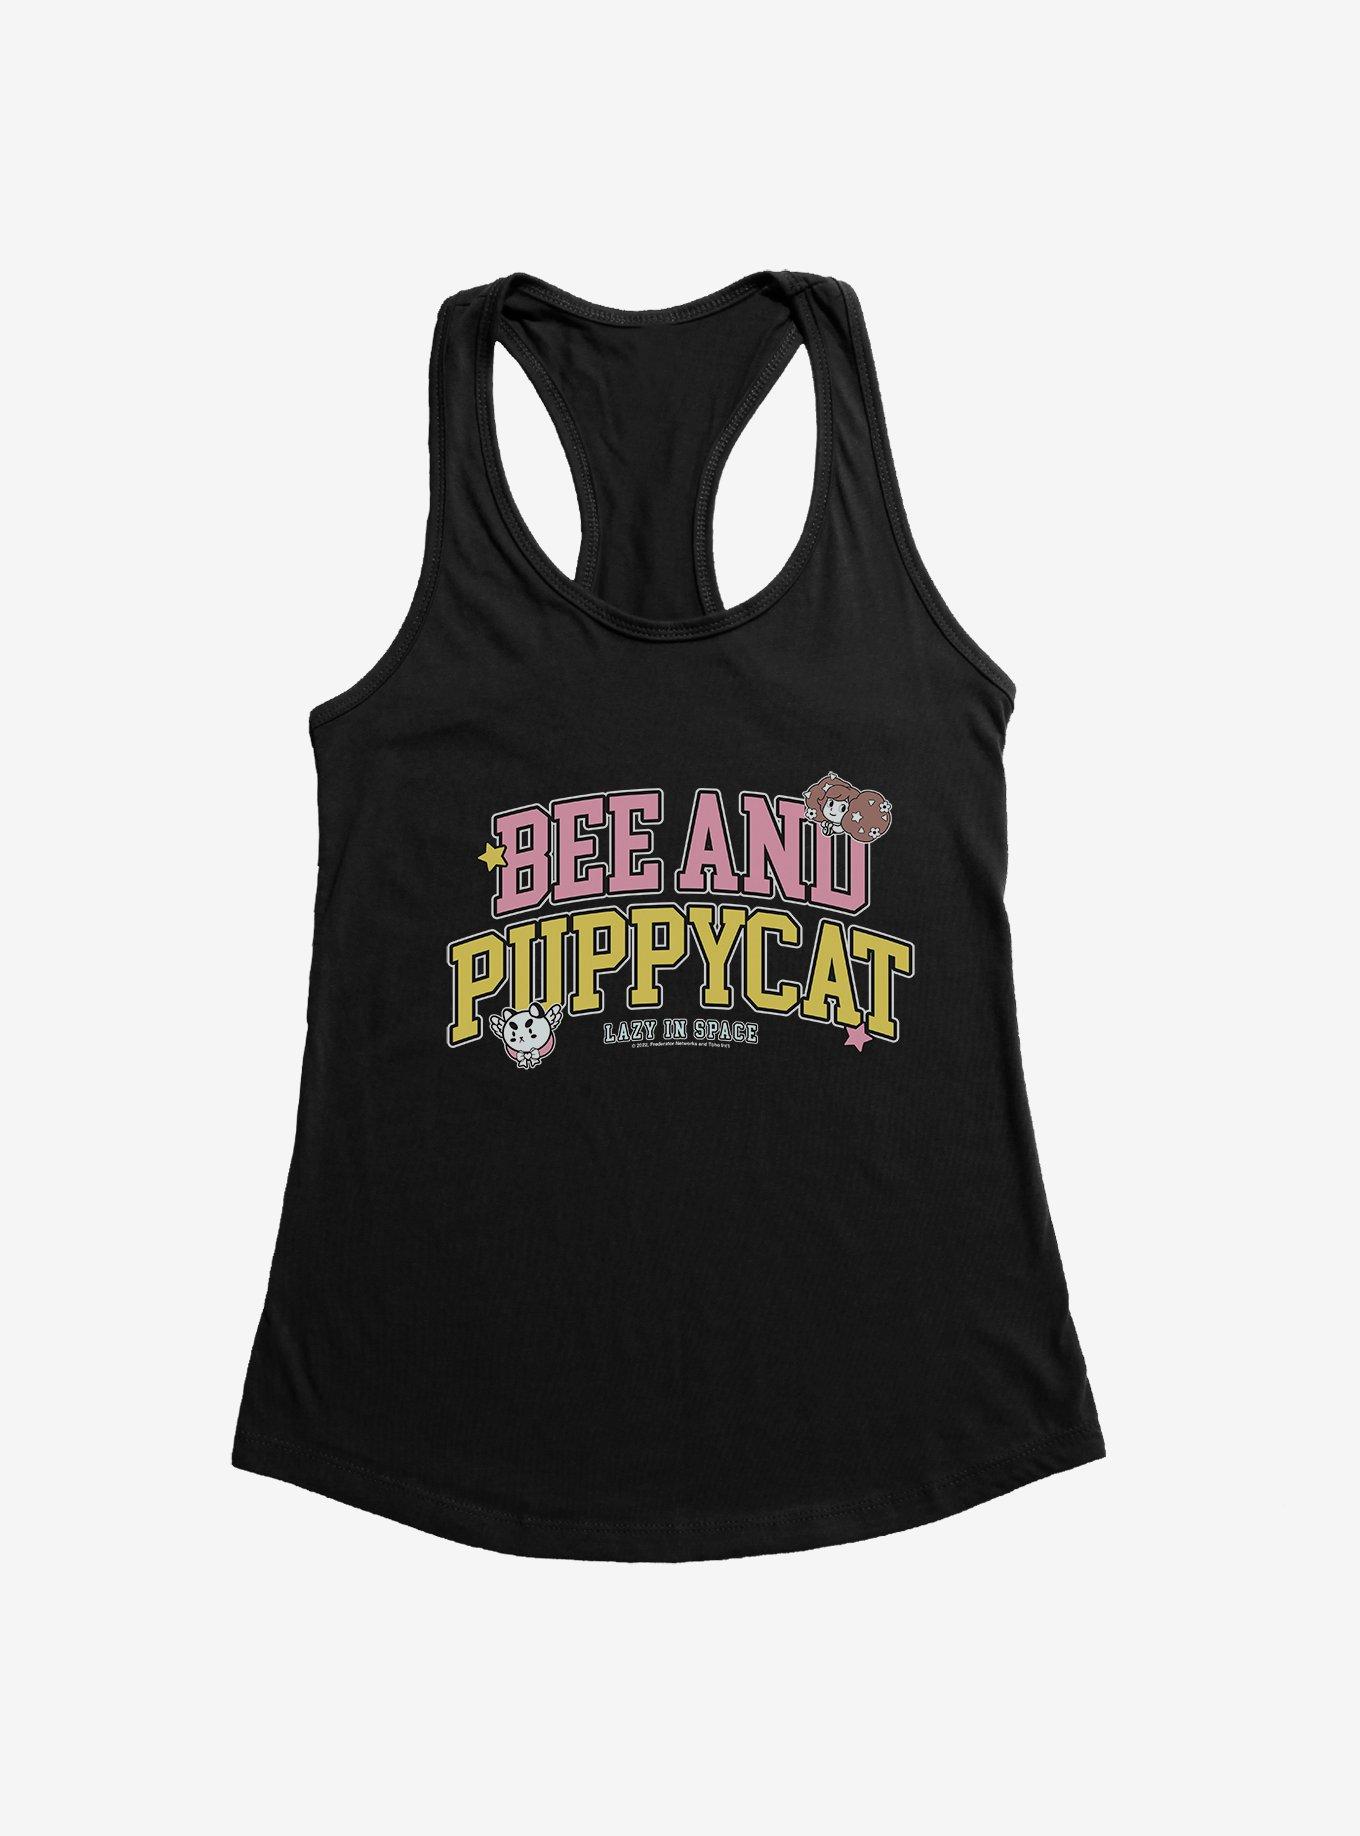 Bee And Puppycat Lazy Space Collegiate Girls Tank